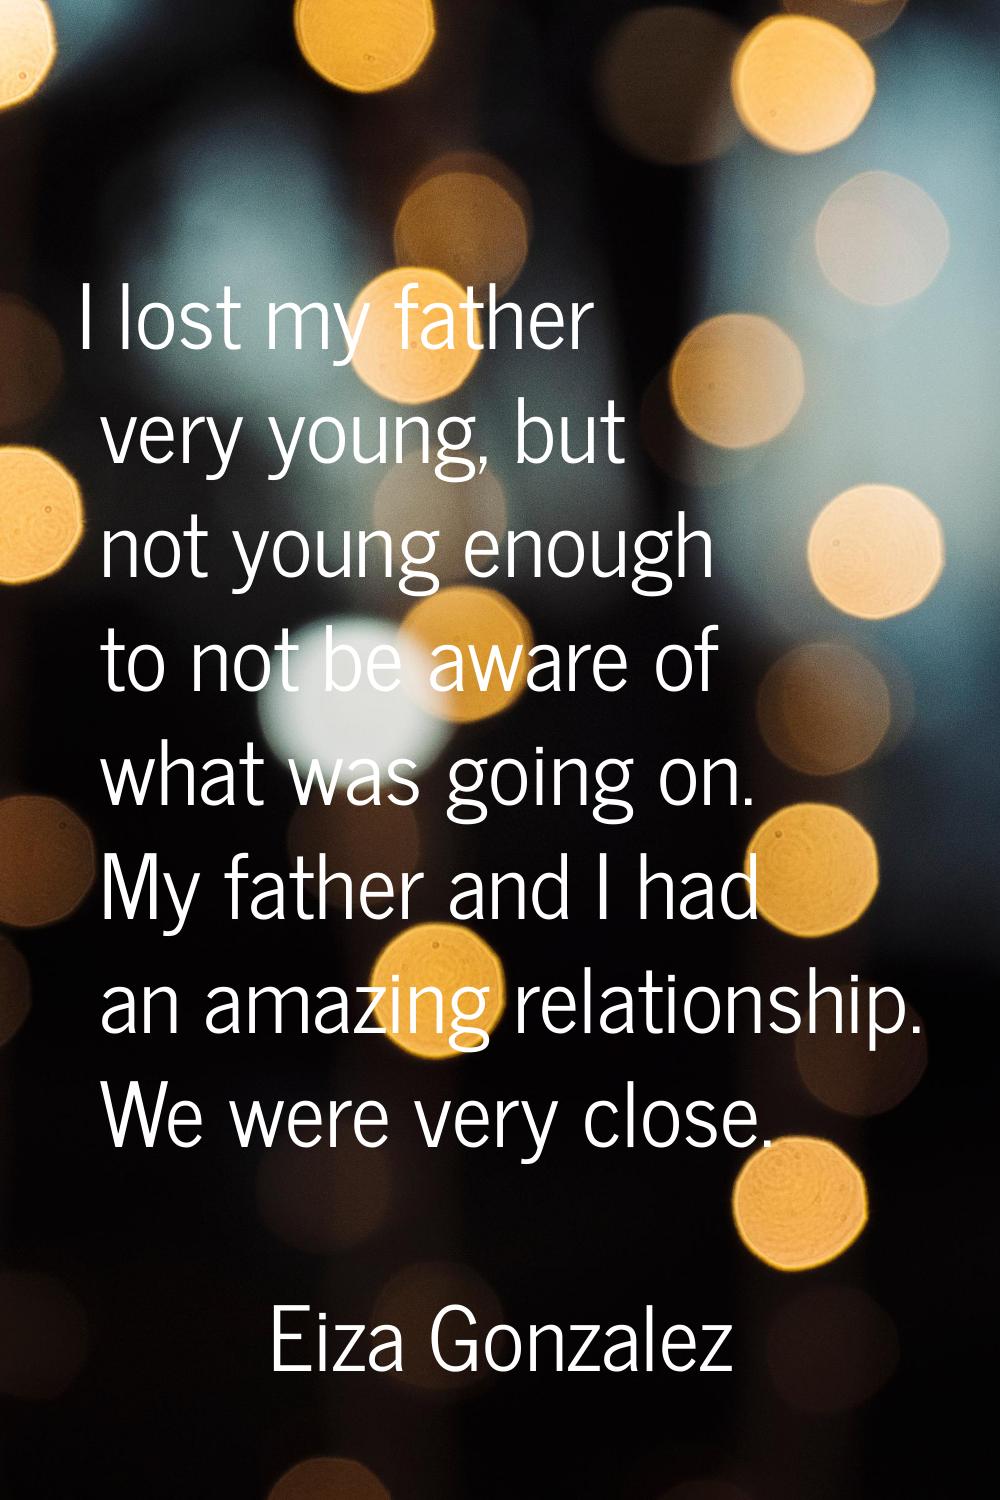 I lost my father very young, but not young enough to not be aware of what was going on. My father a